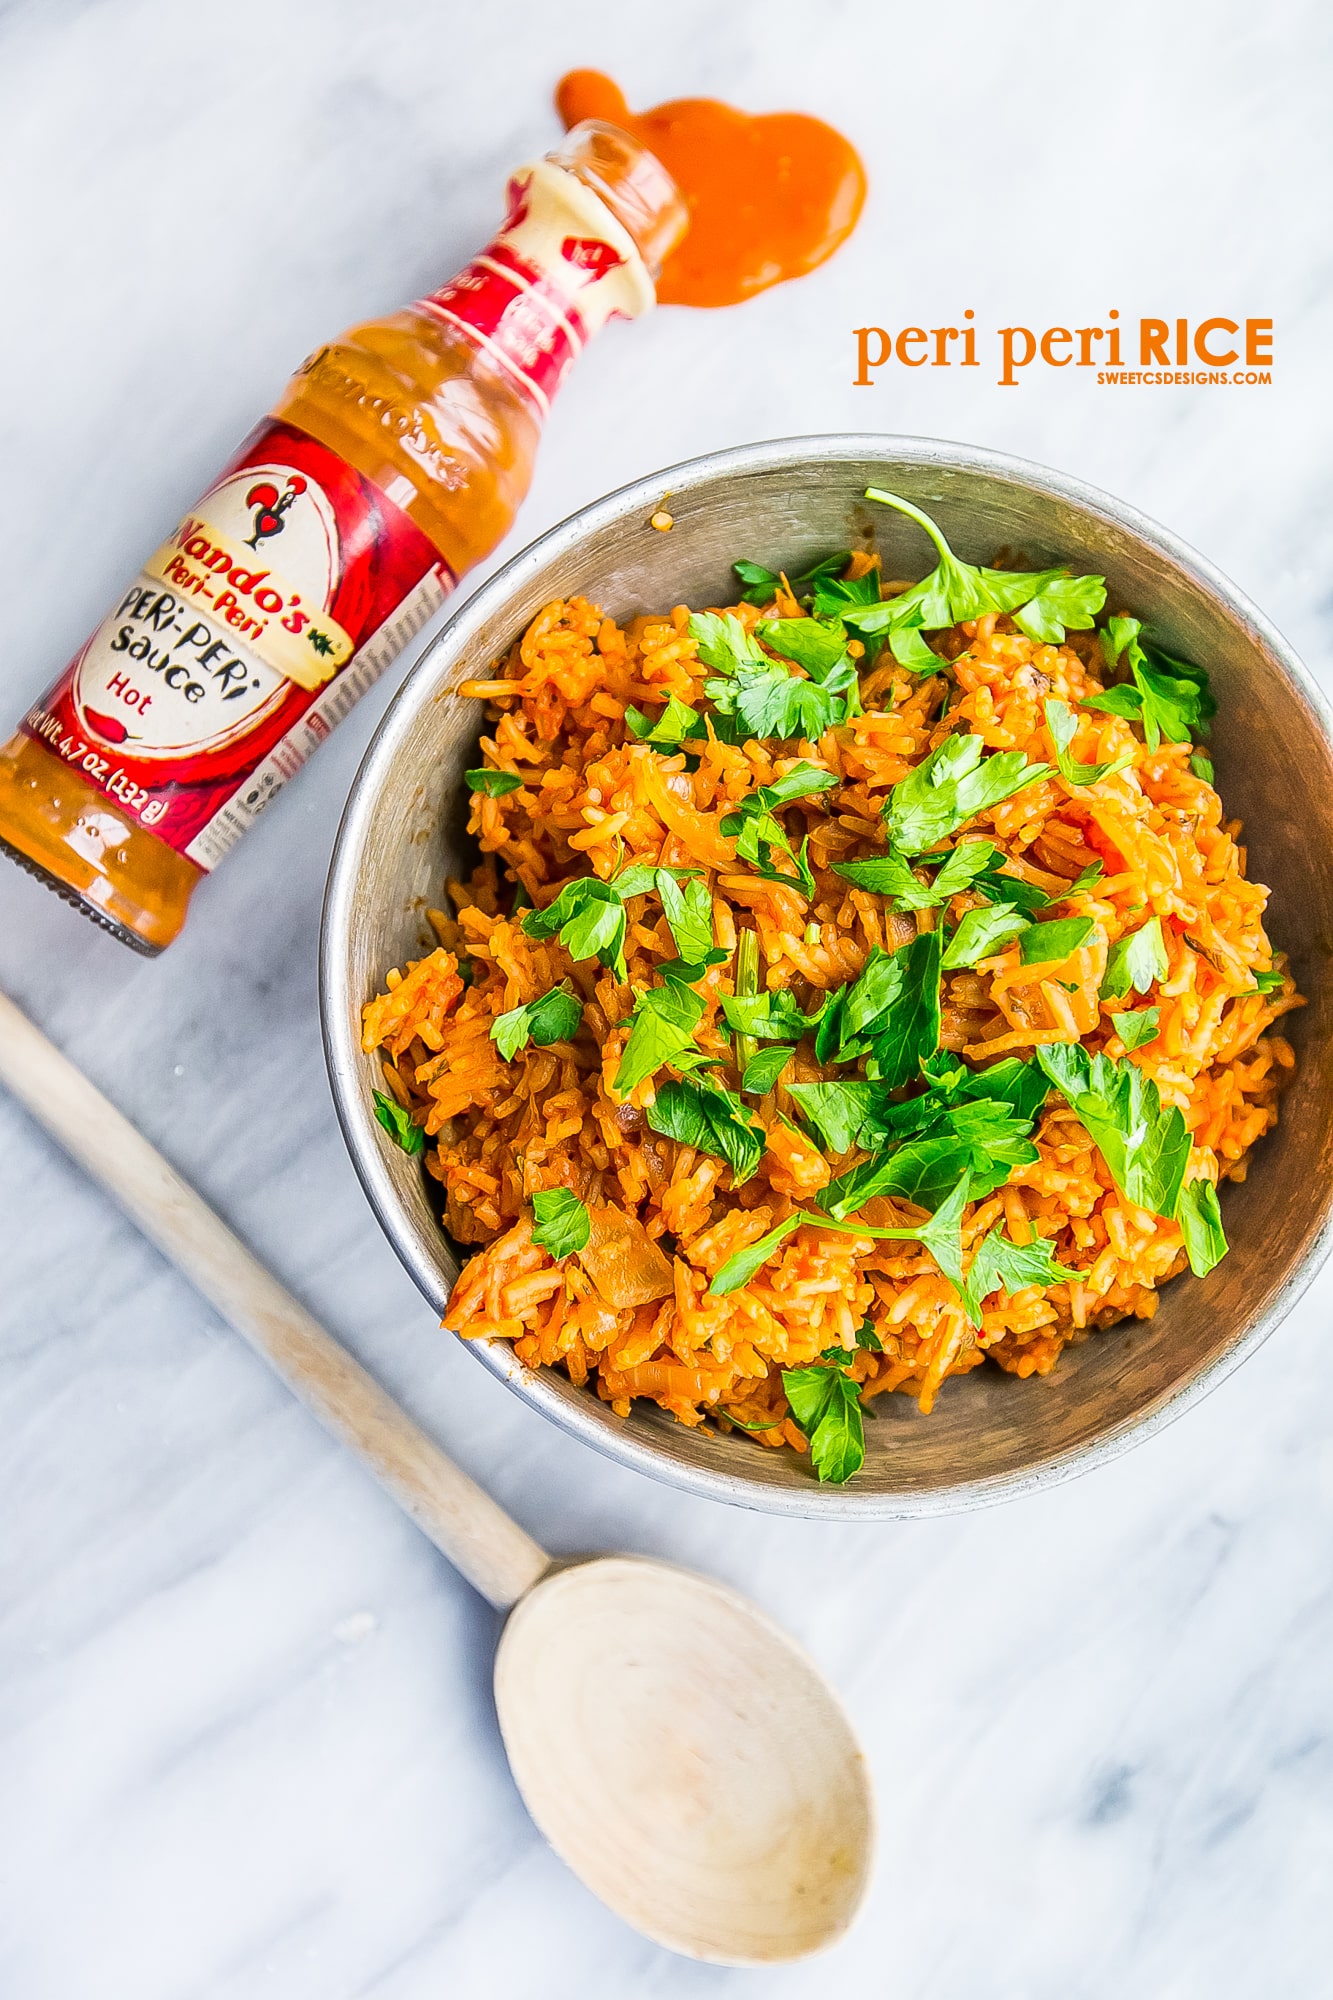 This spicy peri peri rice is so delicious- just like nandos at home!